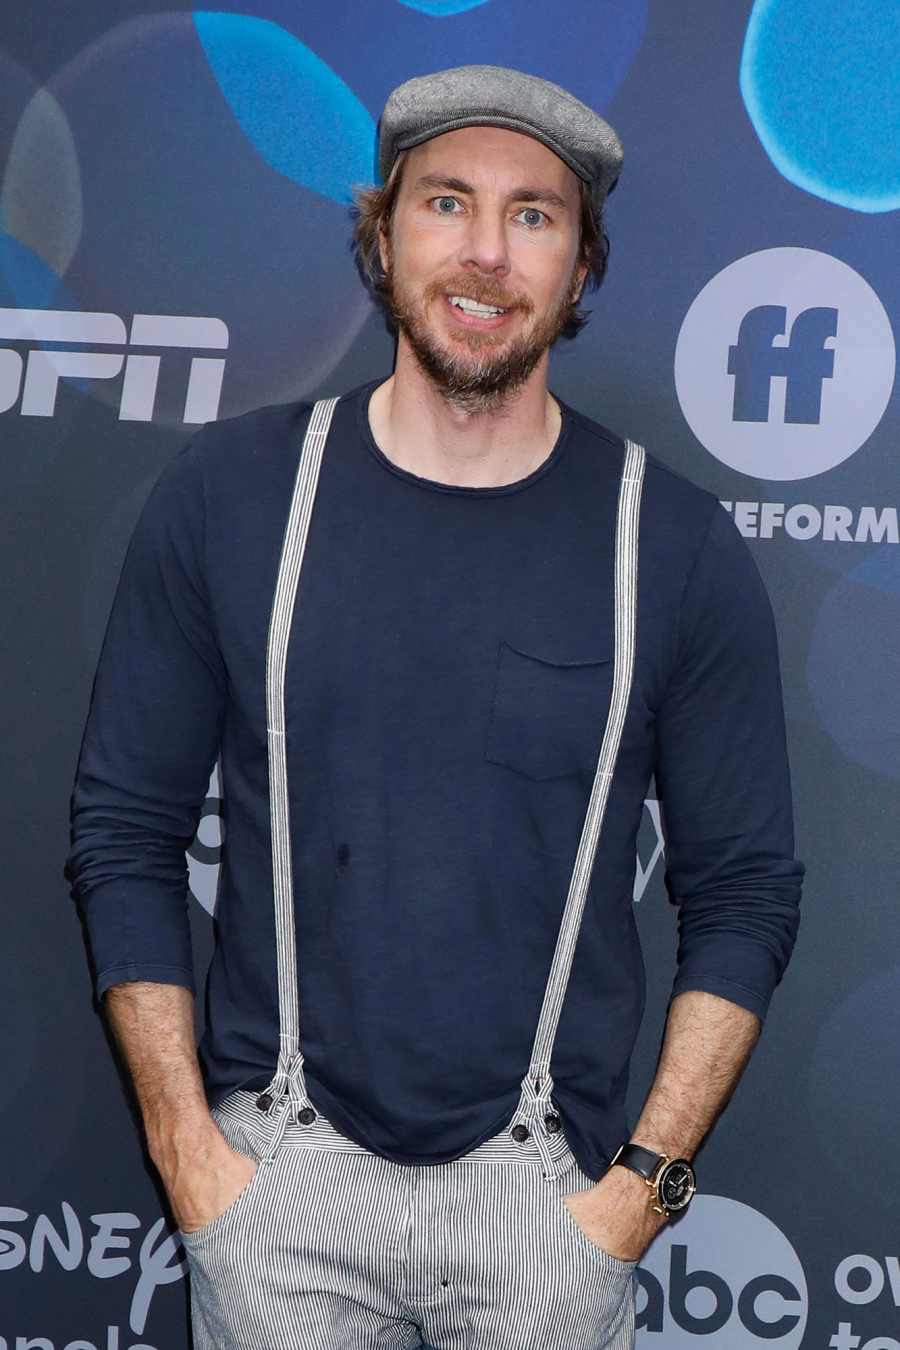 No Point in Hiding Dax Shepard Most Powerful Quotes About Addiction and Sobriety